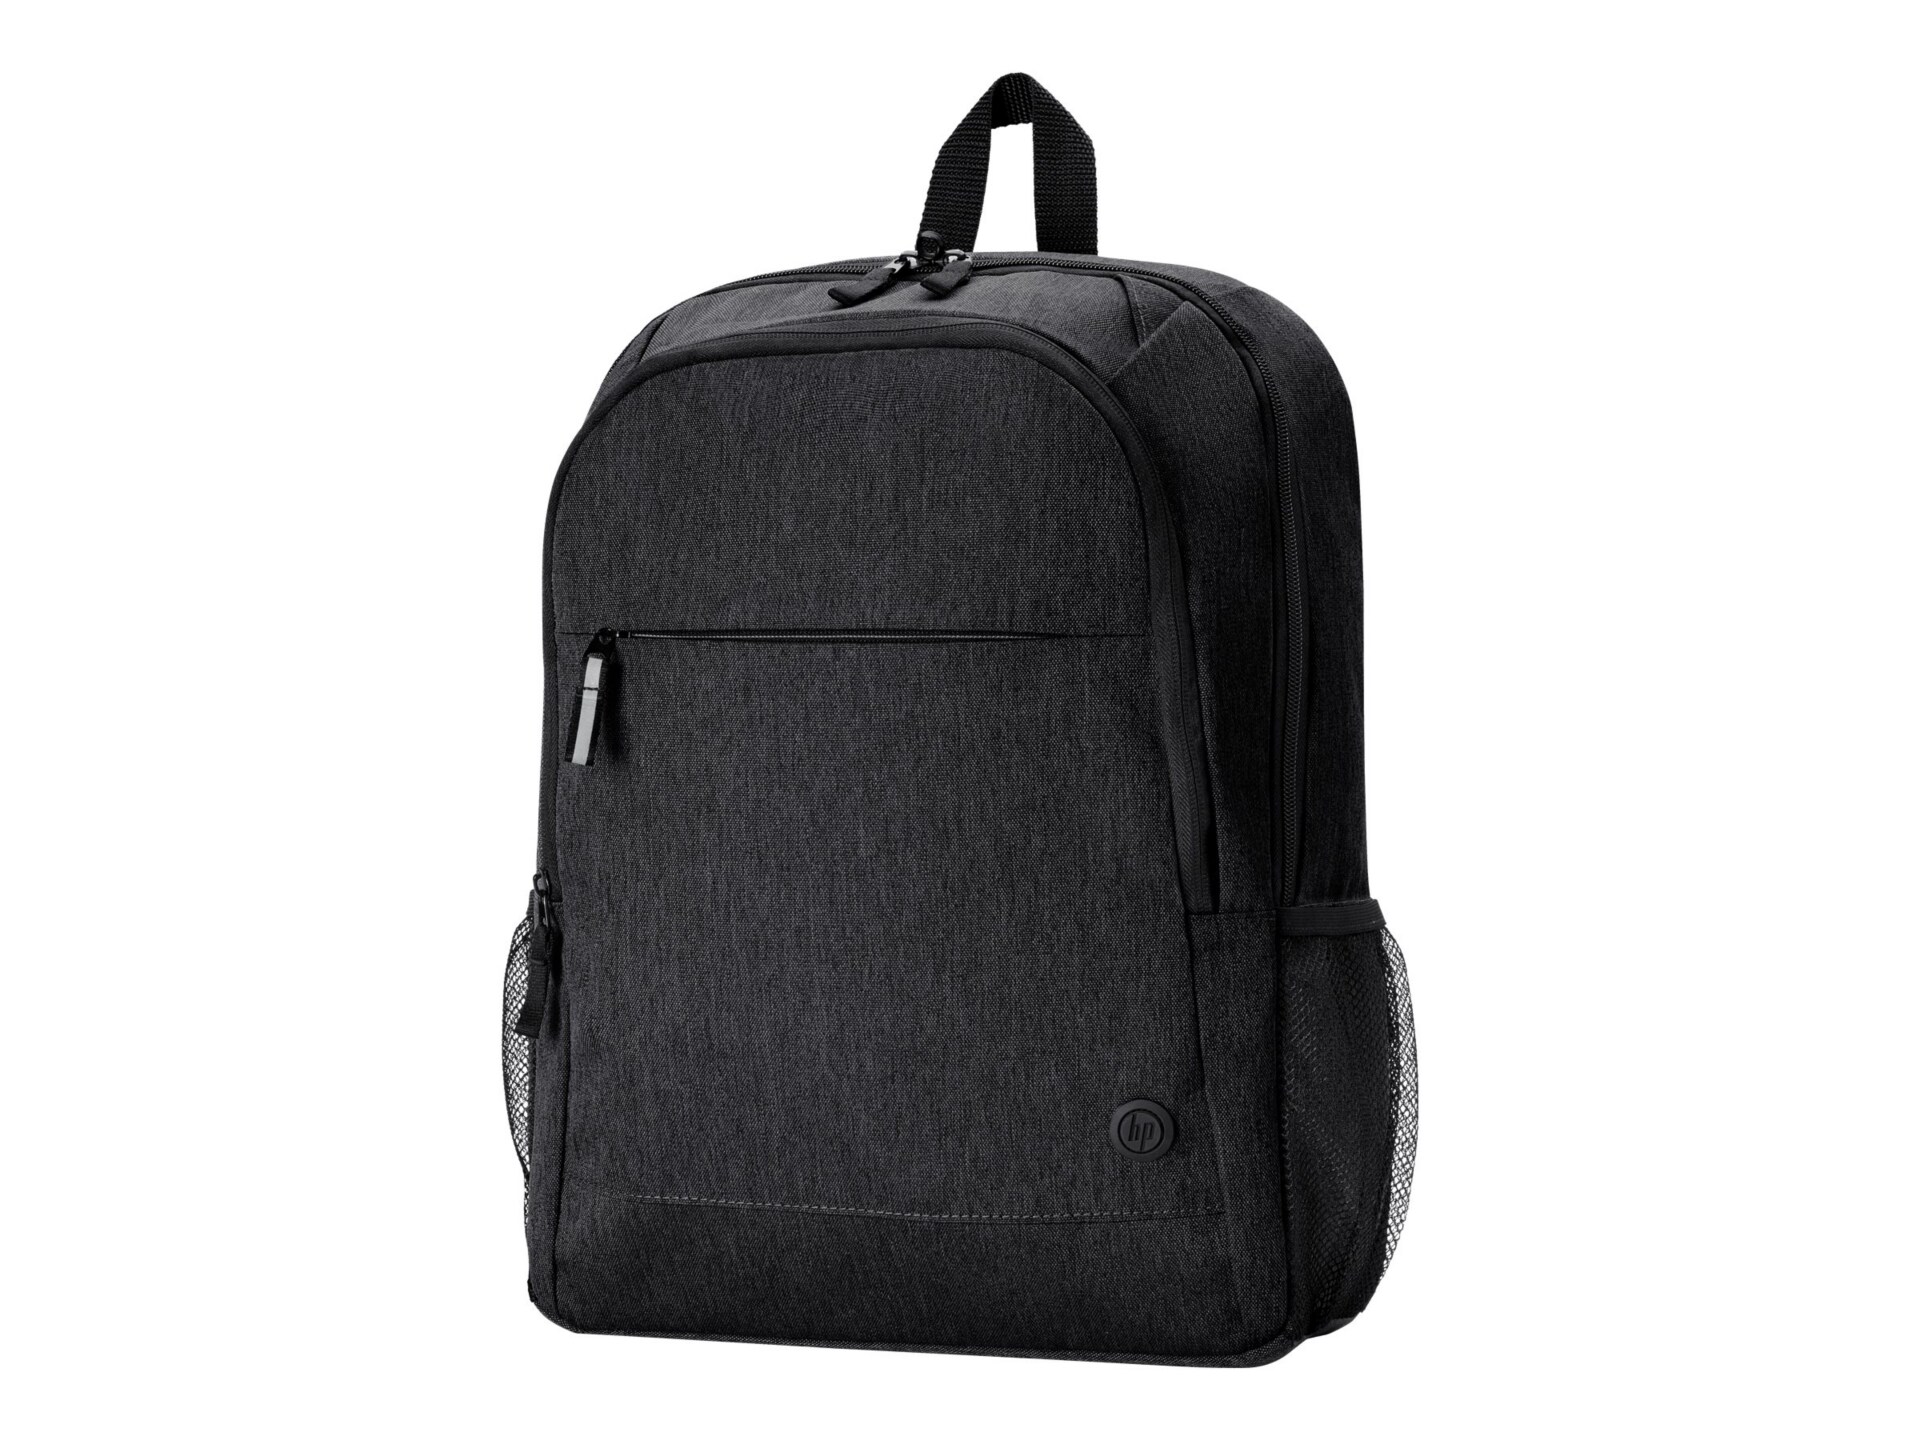 HP Prelude Pro Carrying Case (Backpack) for 15.6" HP Notebook, Workstation